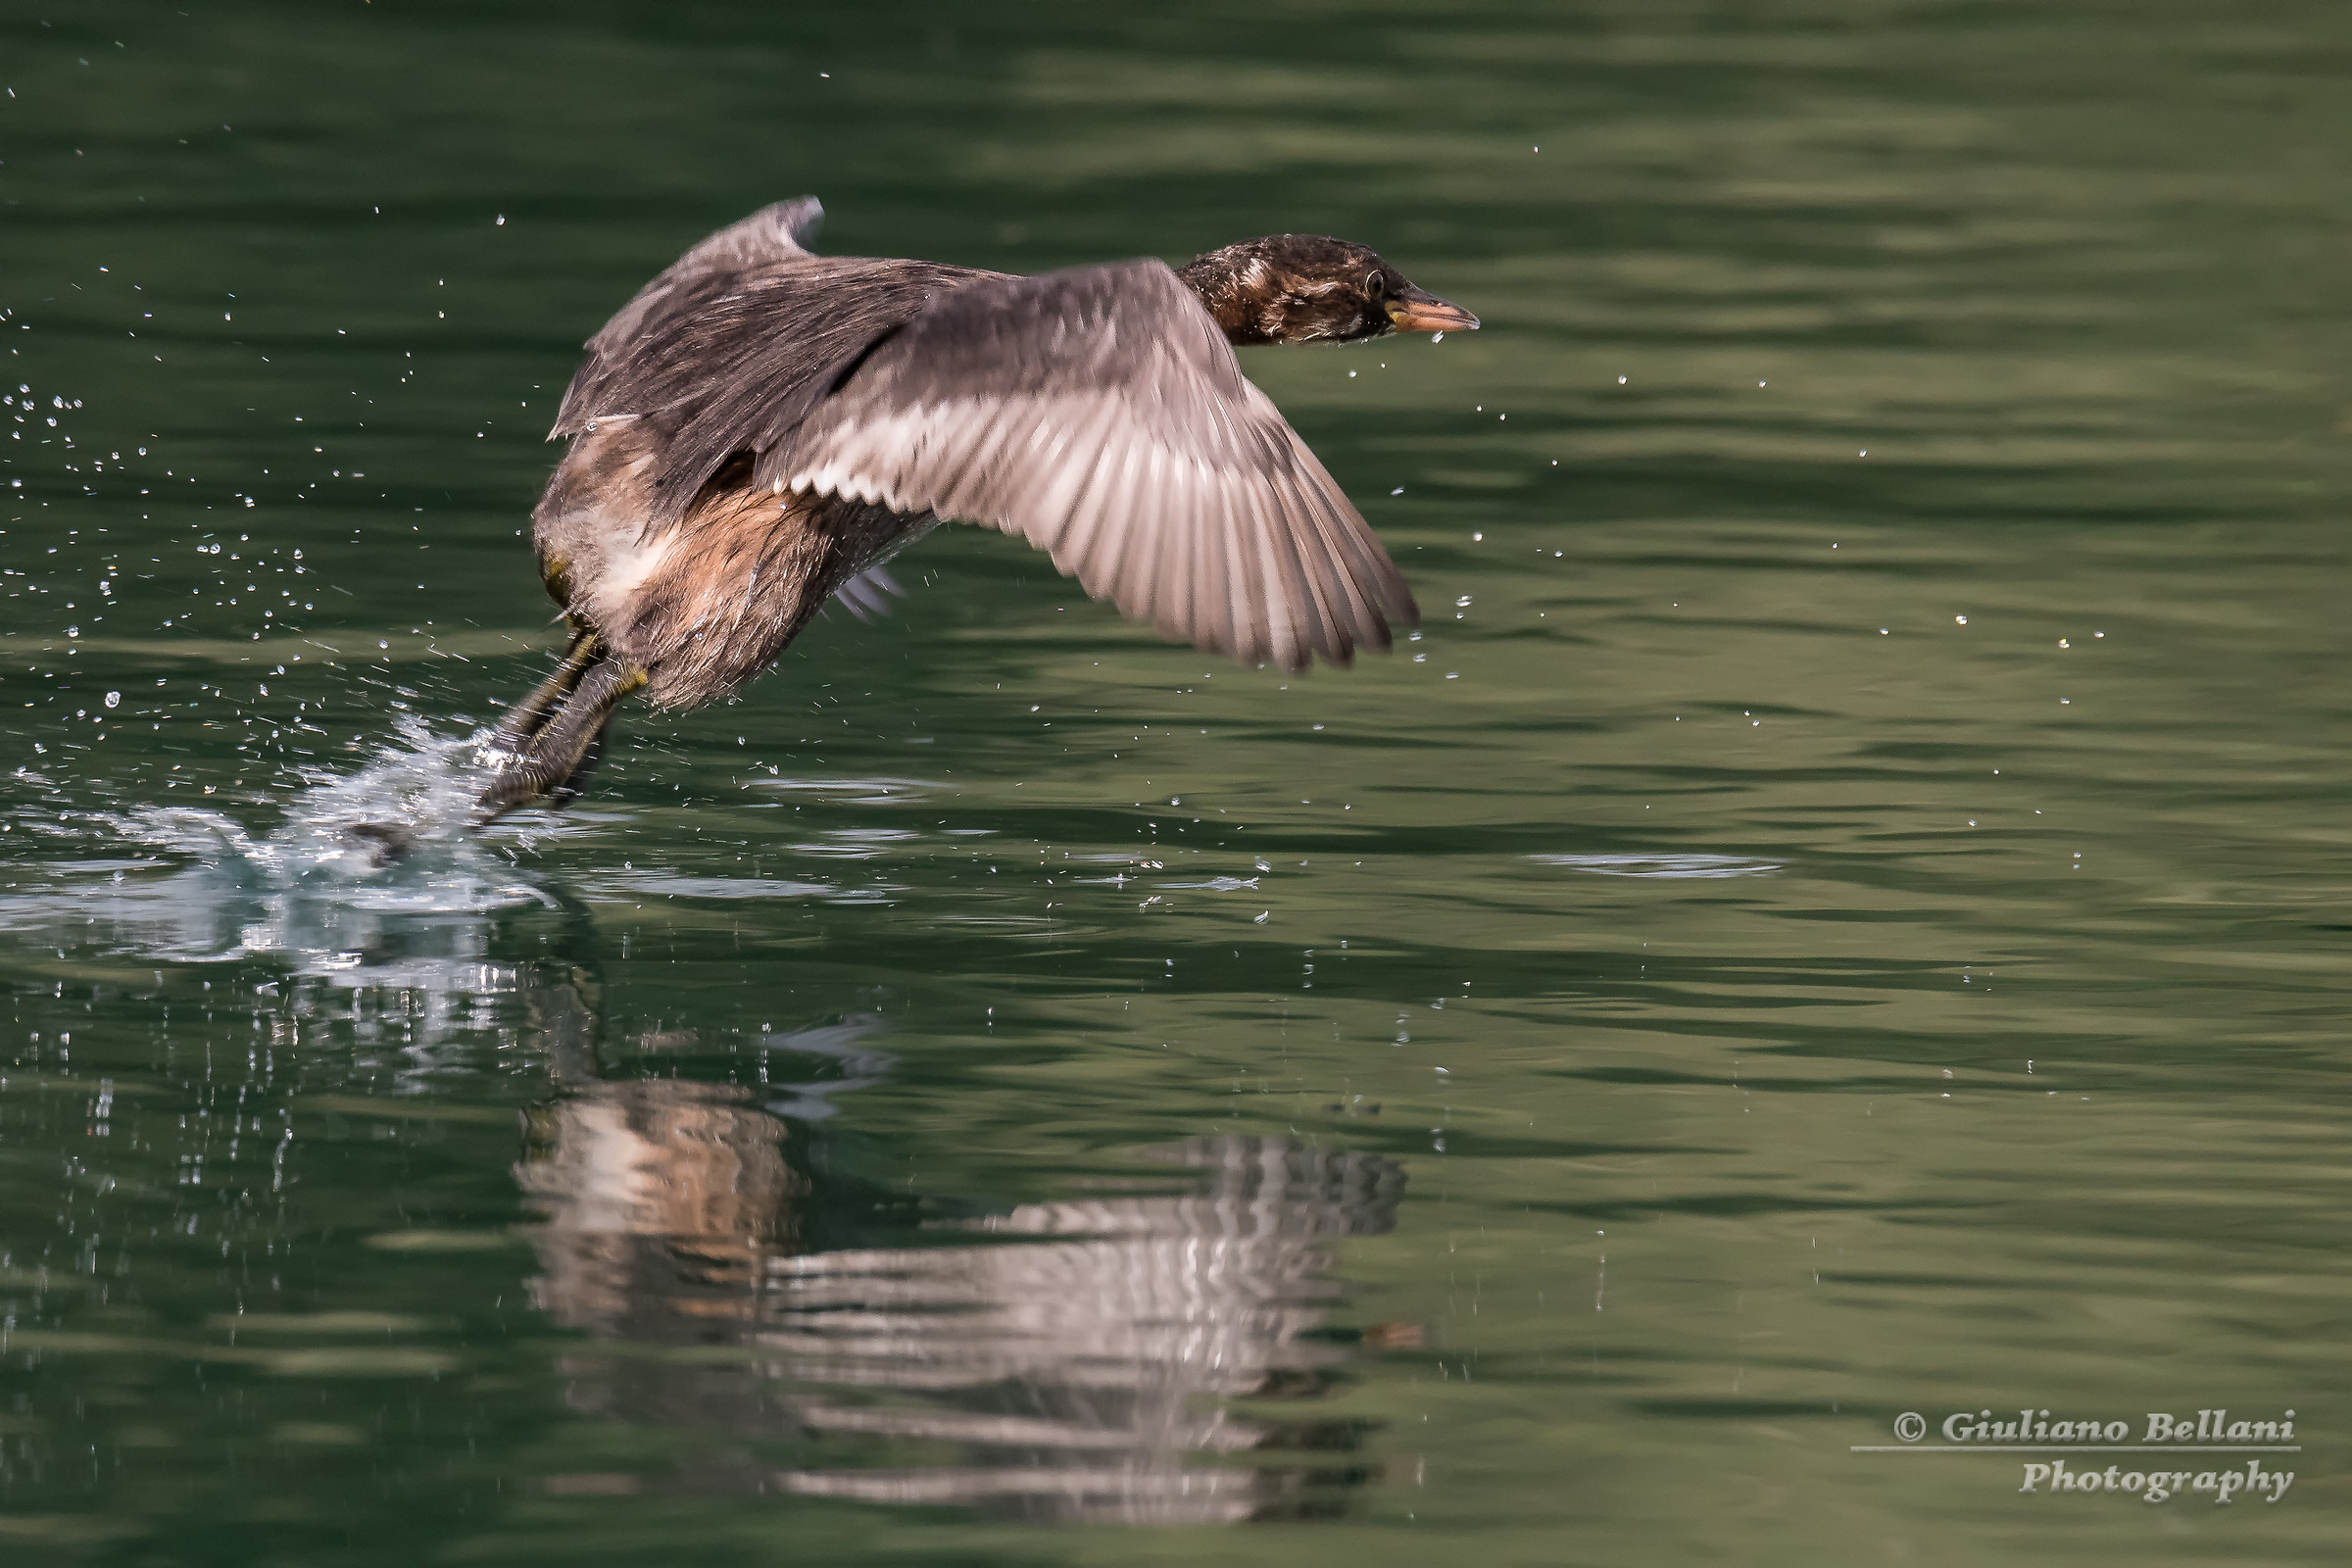 The flight of the Little Grebe...